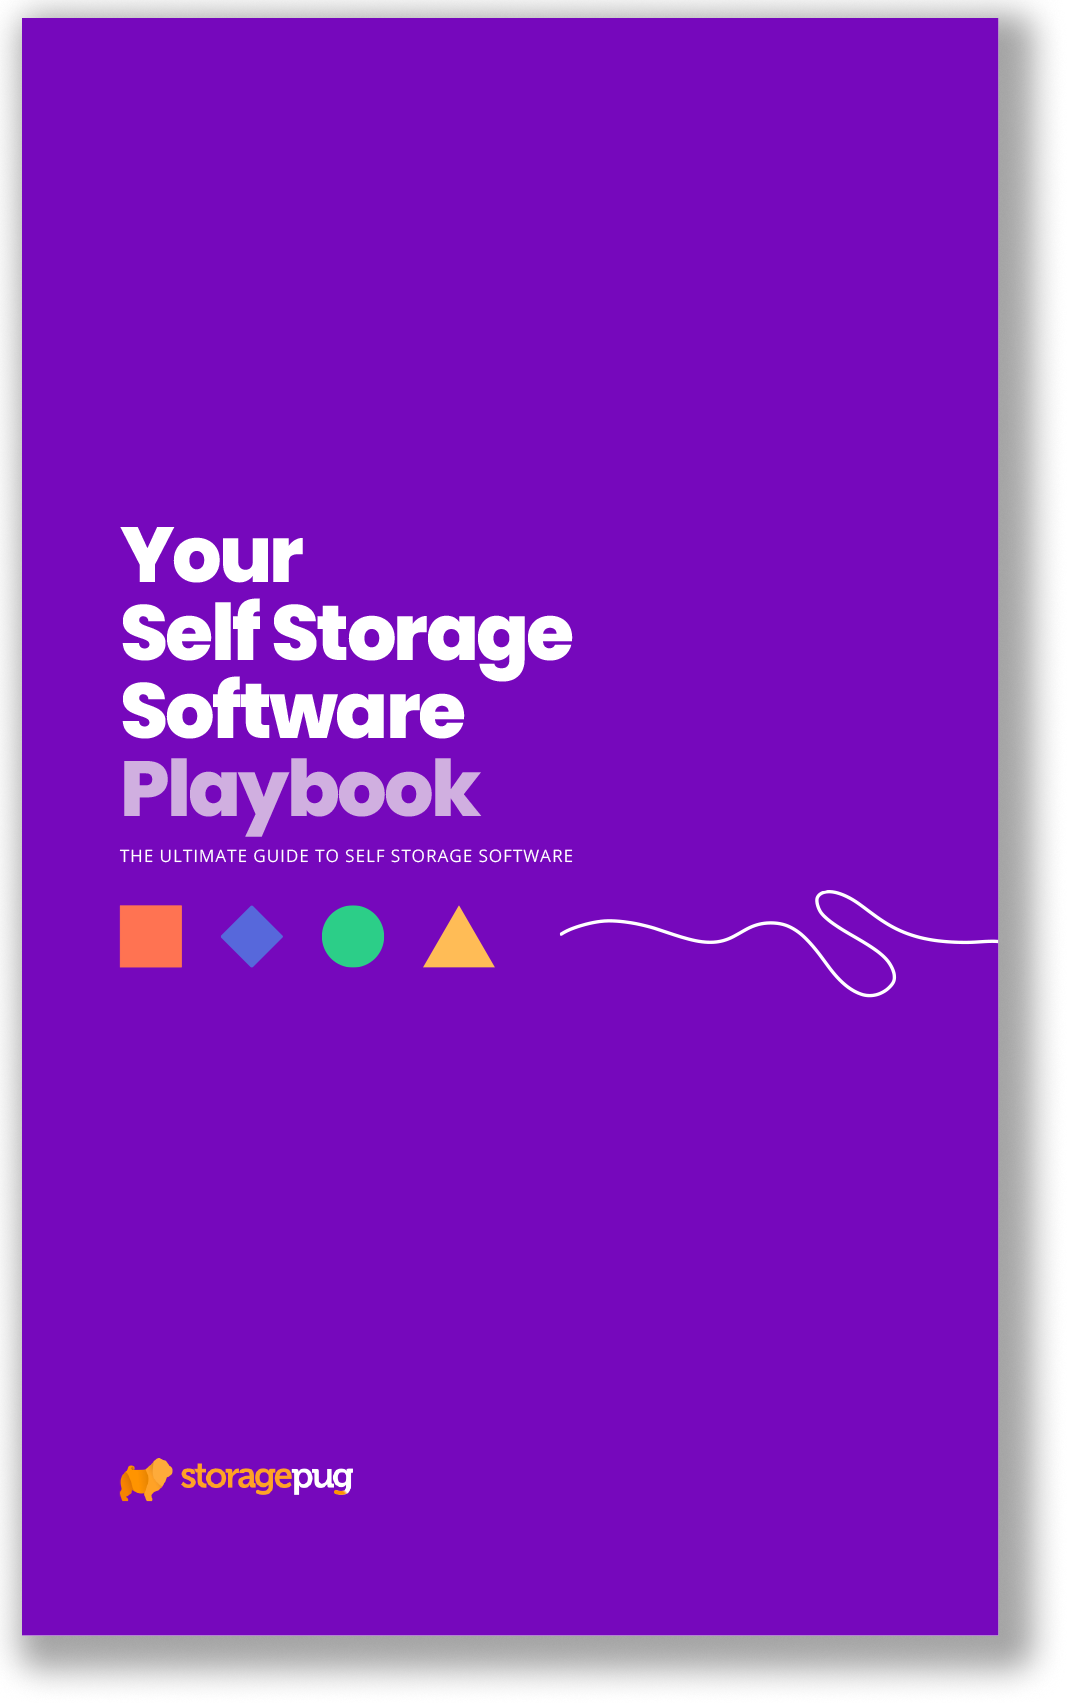 Self Storage Software Playbook - Shadow Cover